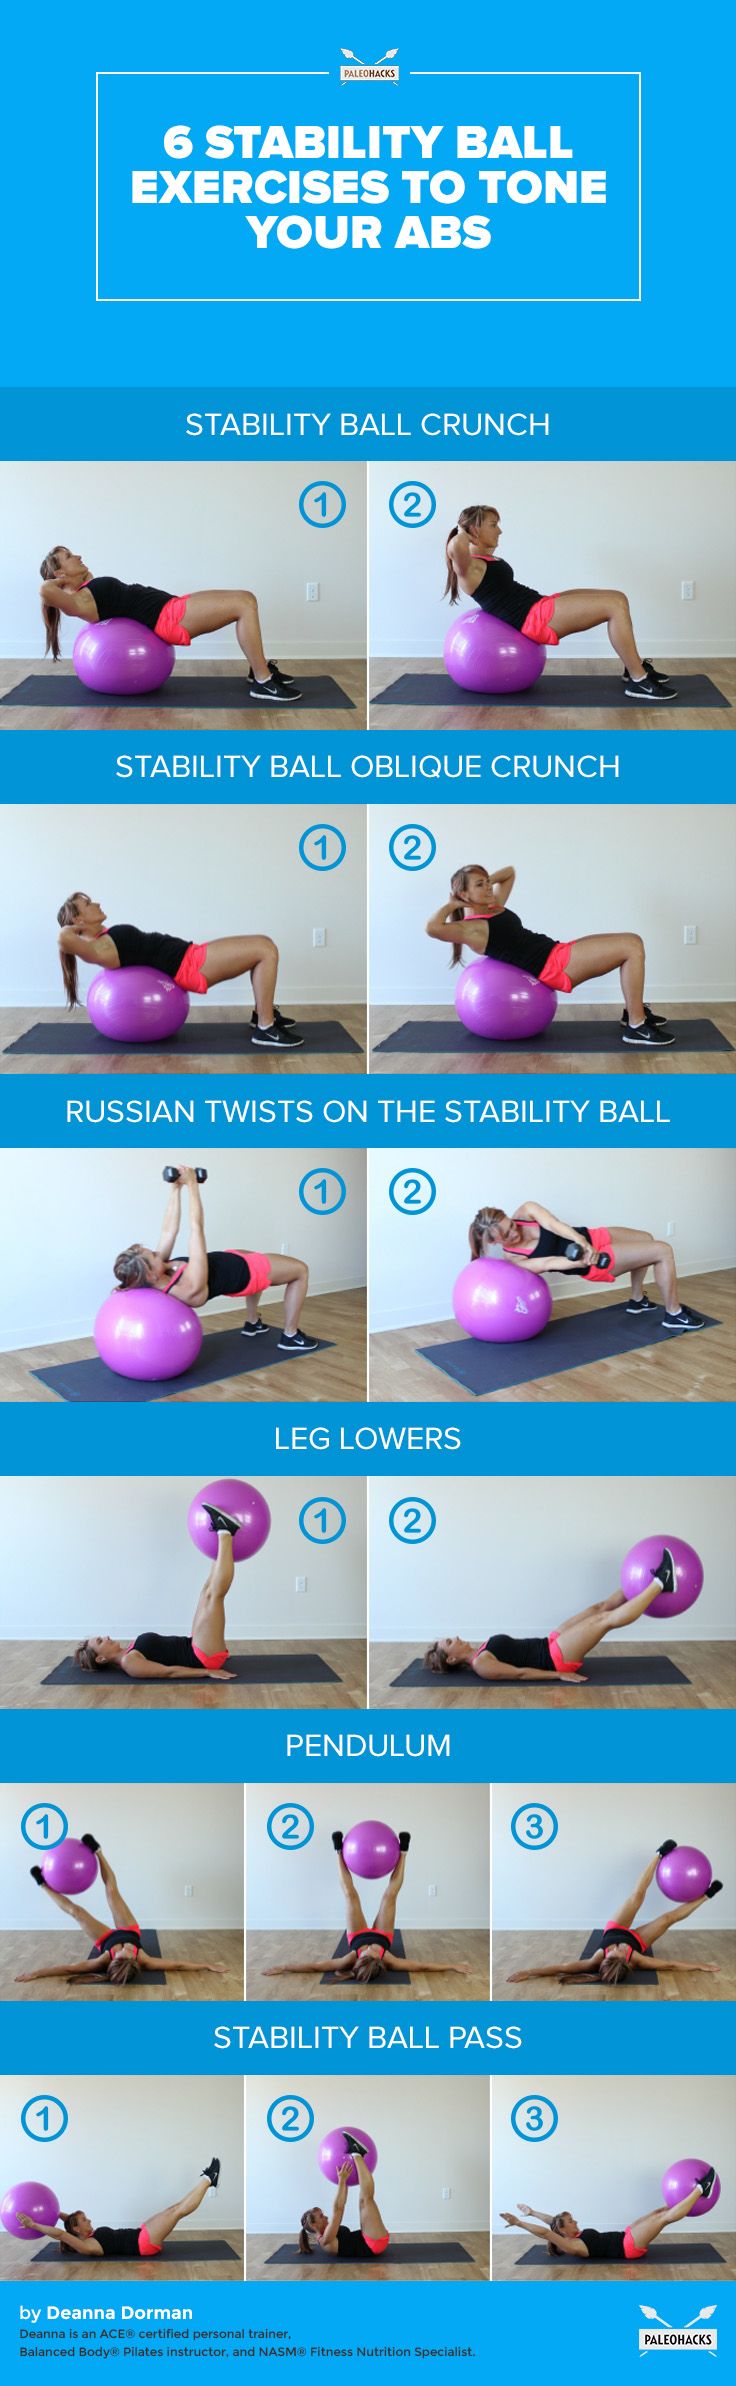 Stability Ball Workouts